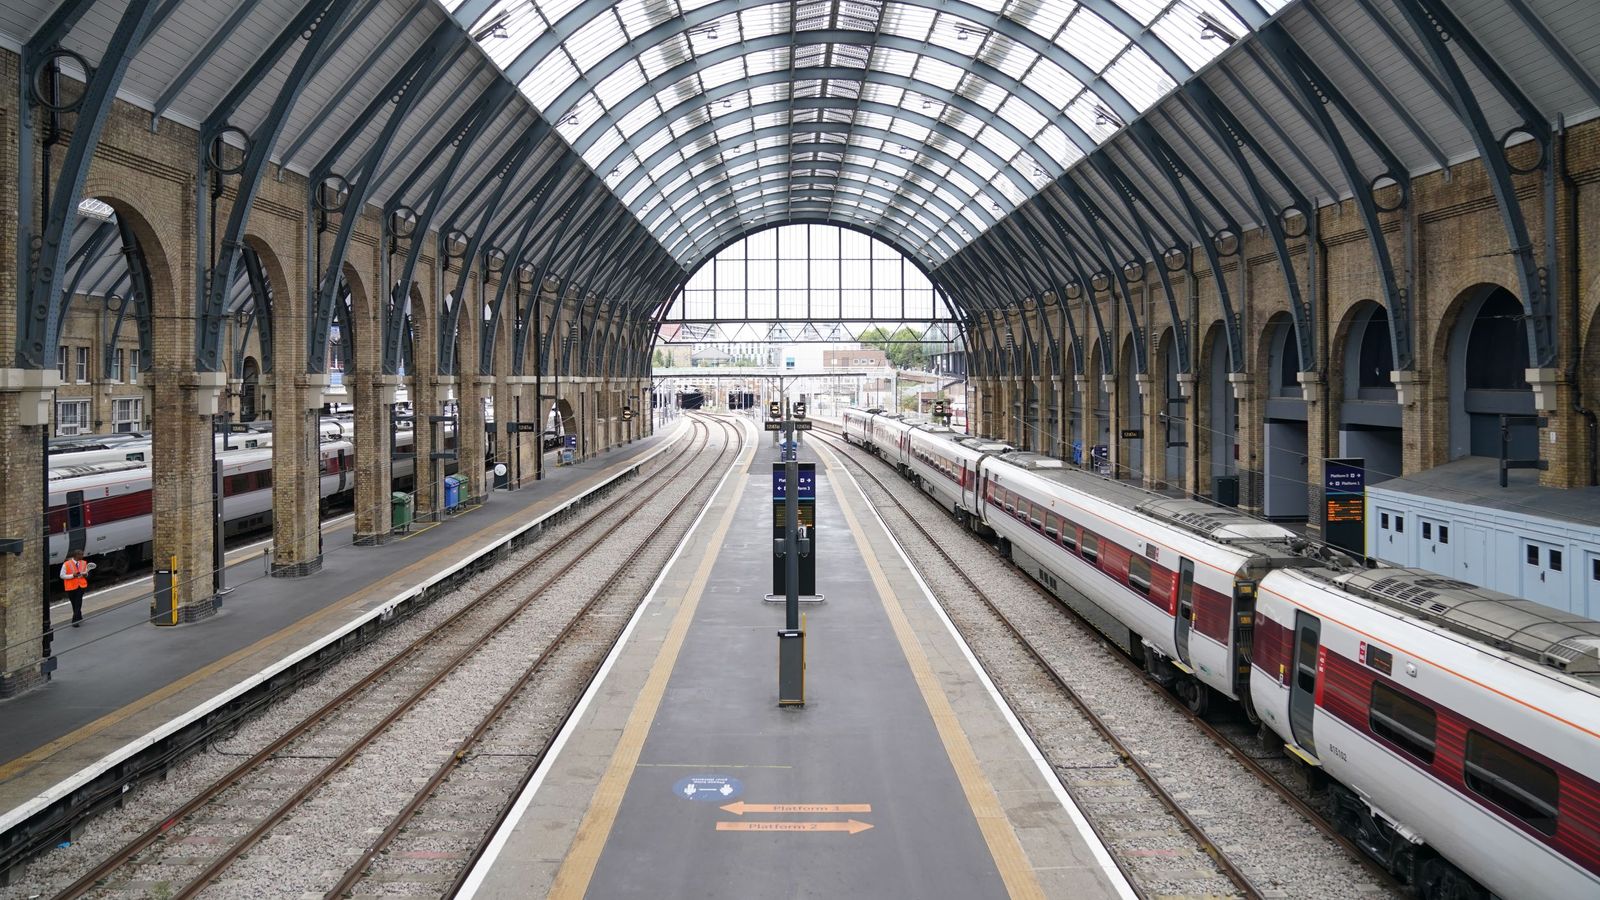 More rail strikes announced for 3 and 5 November, this time involving train operators